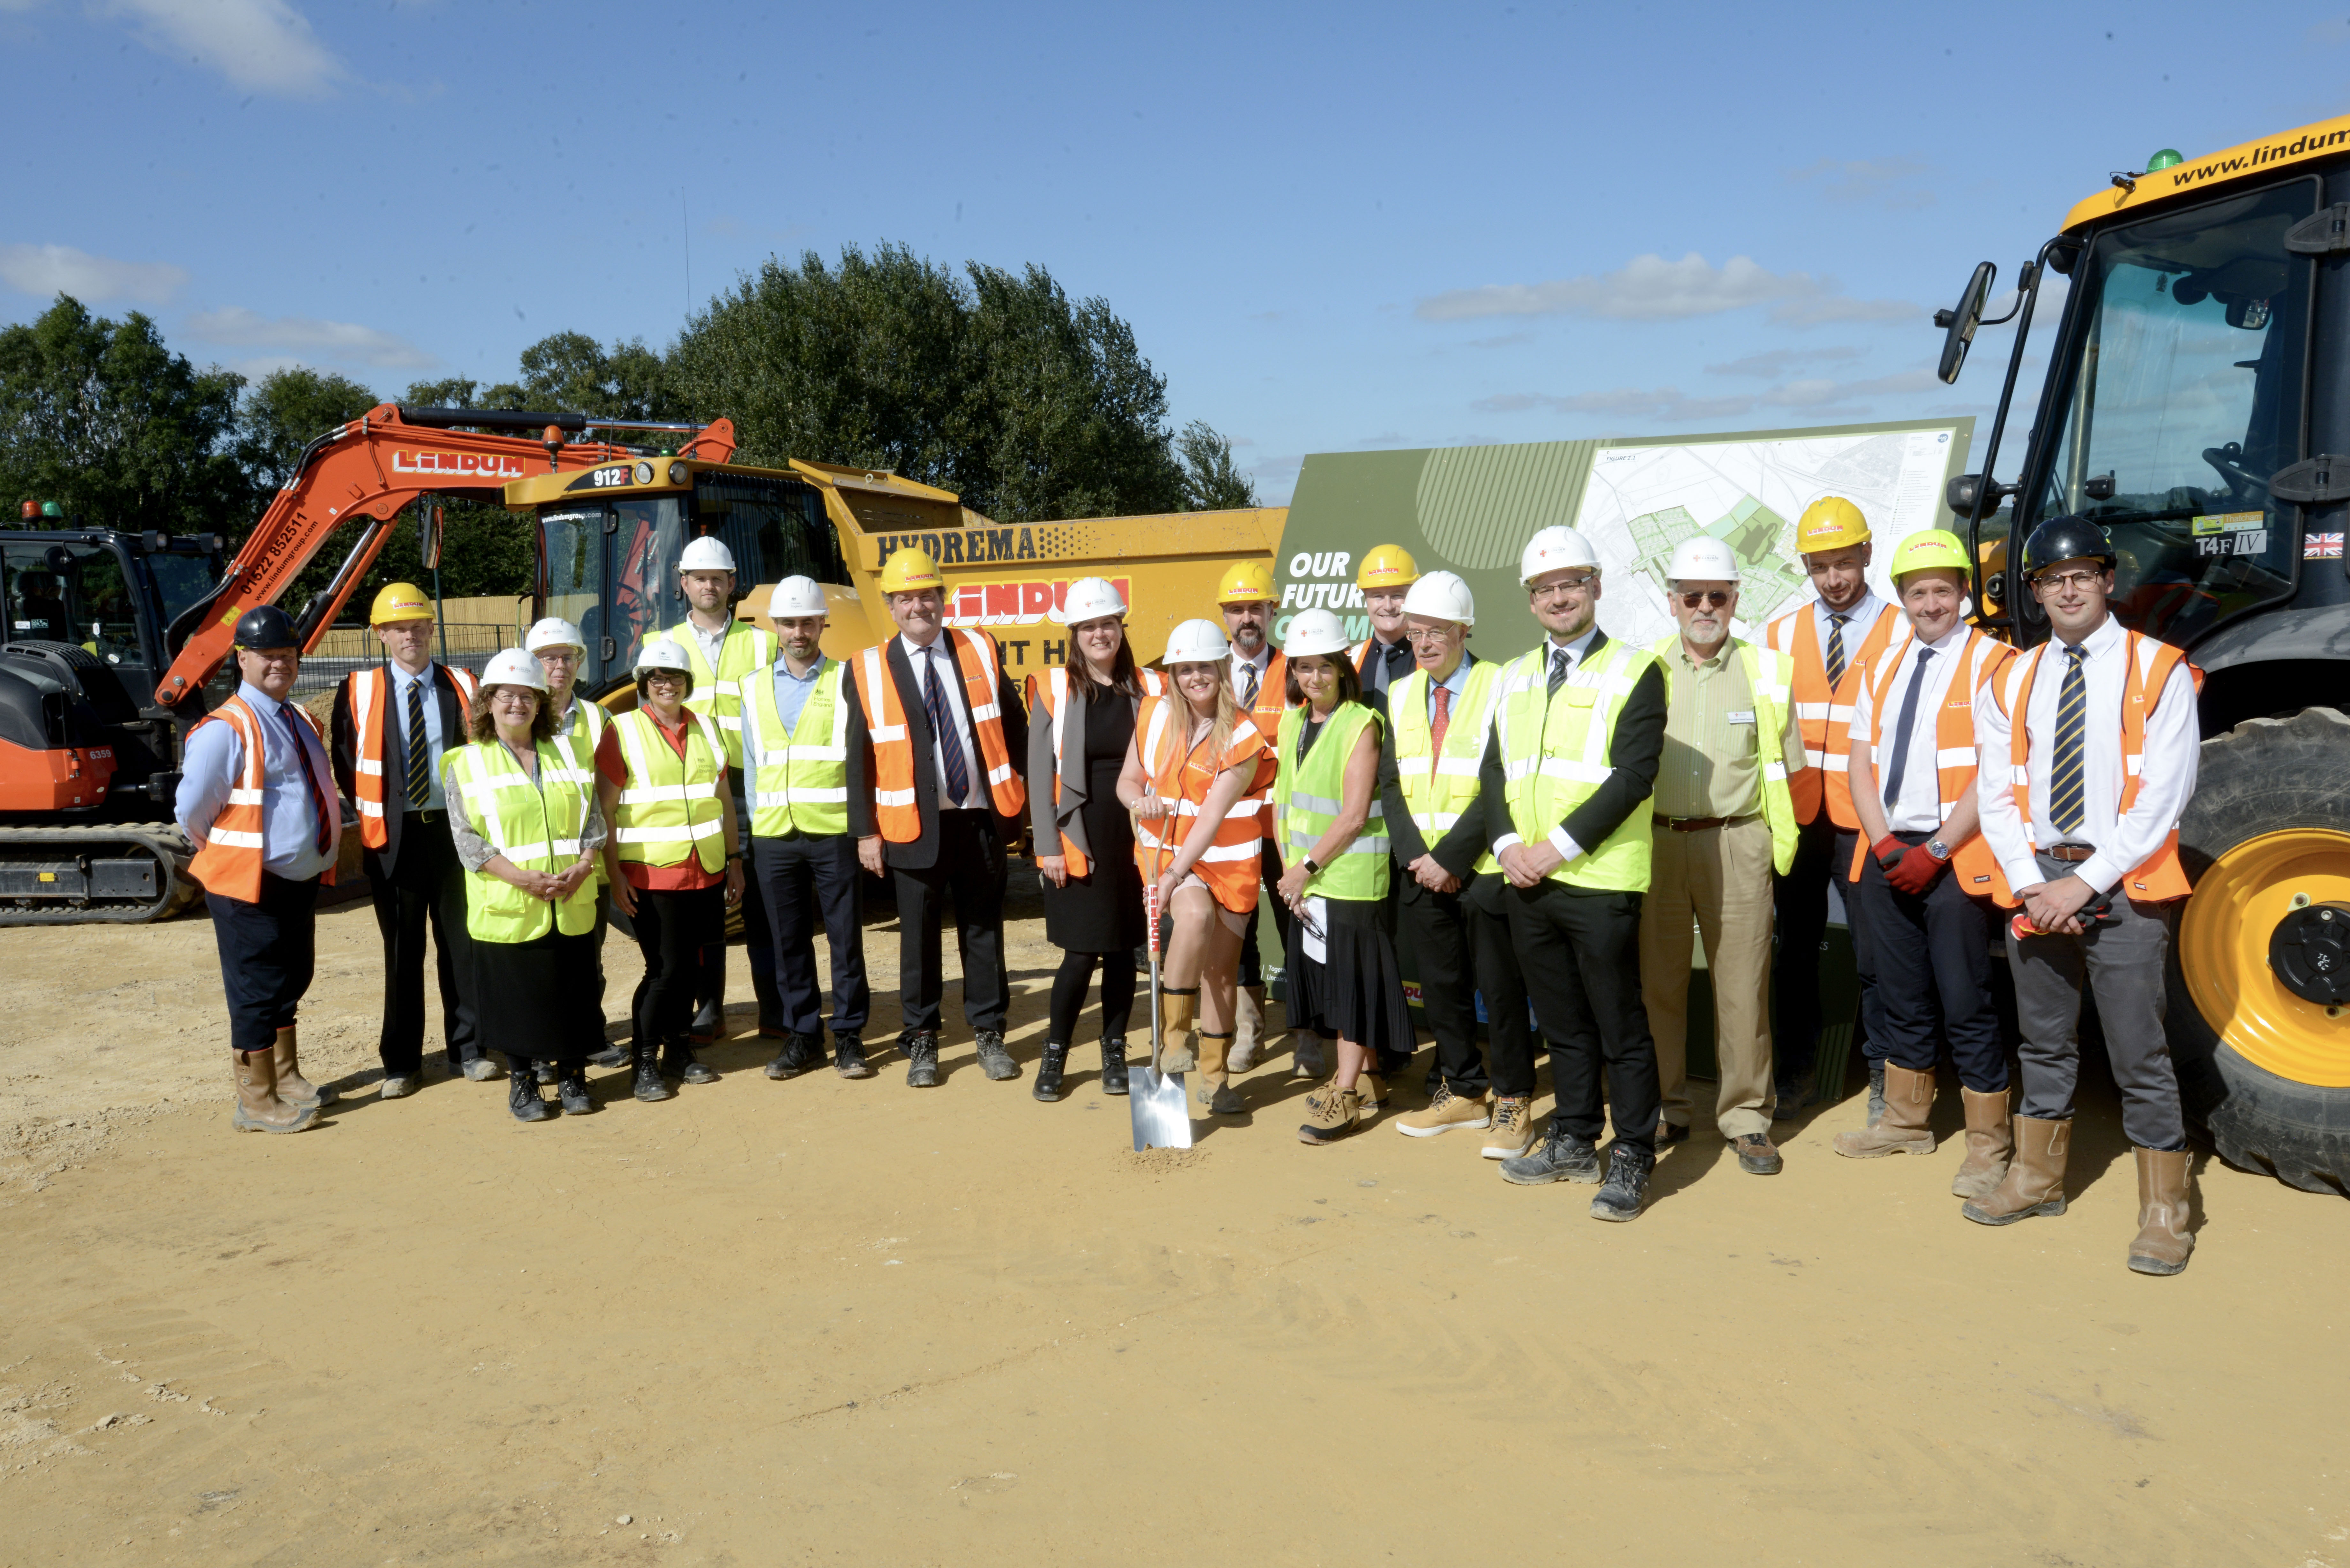 City of Lincoln Council and Lindum start construction works on the Western Growth Corridor site.